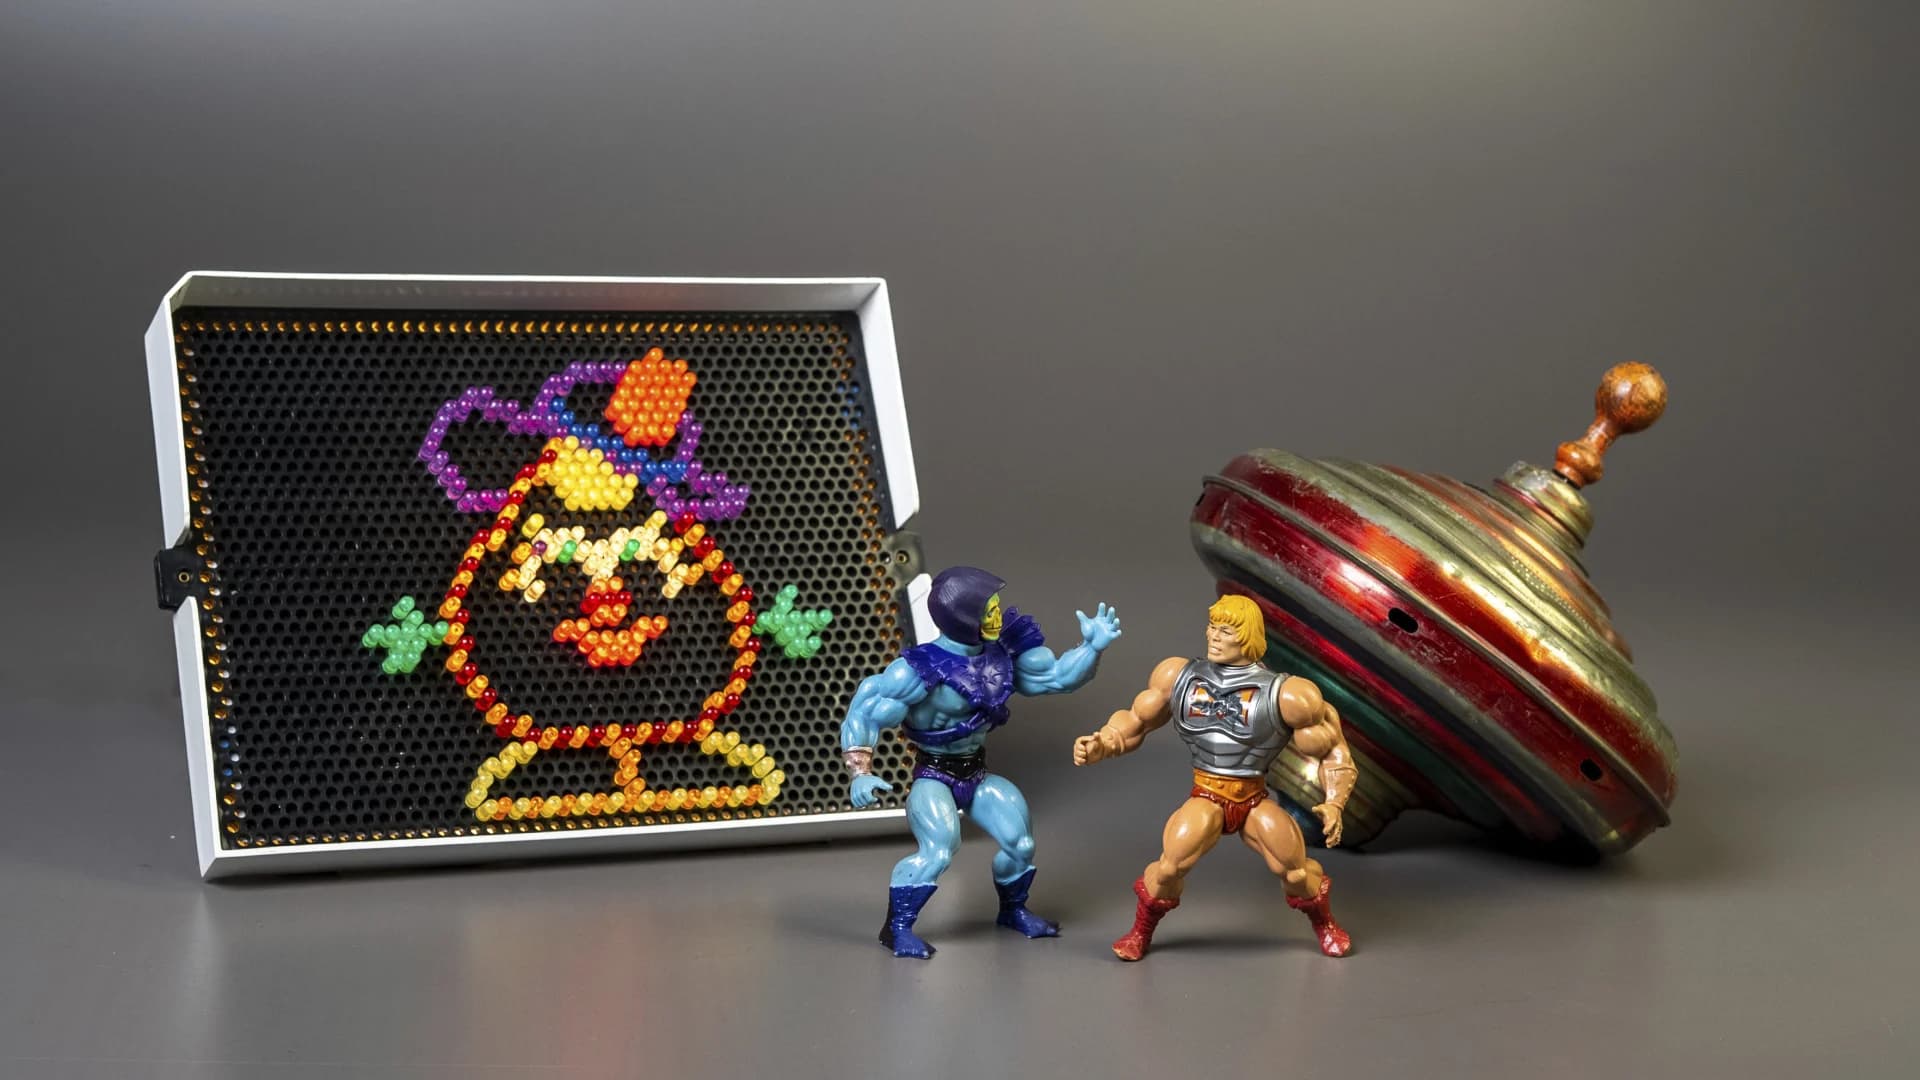 Spinner top, Lite-Brite, Masters of the Universe in toy hall of fame